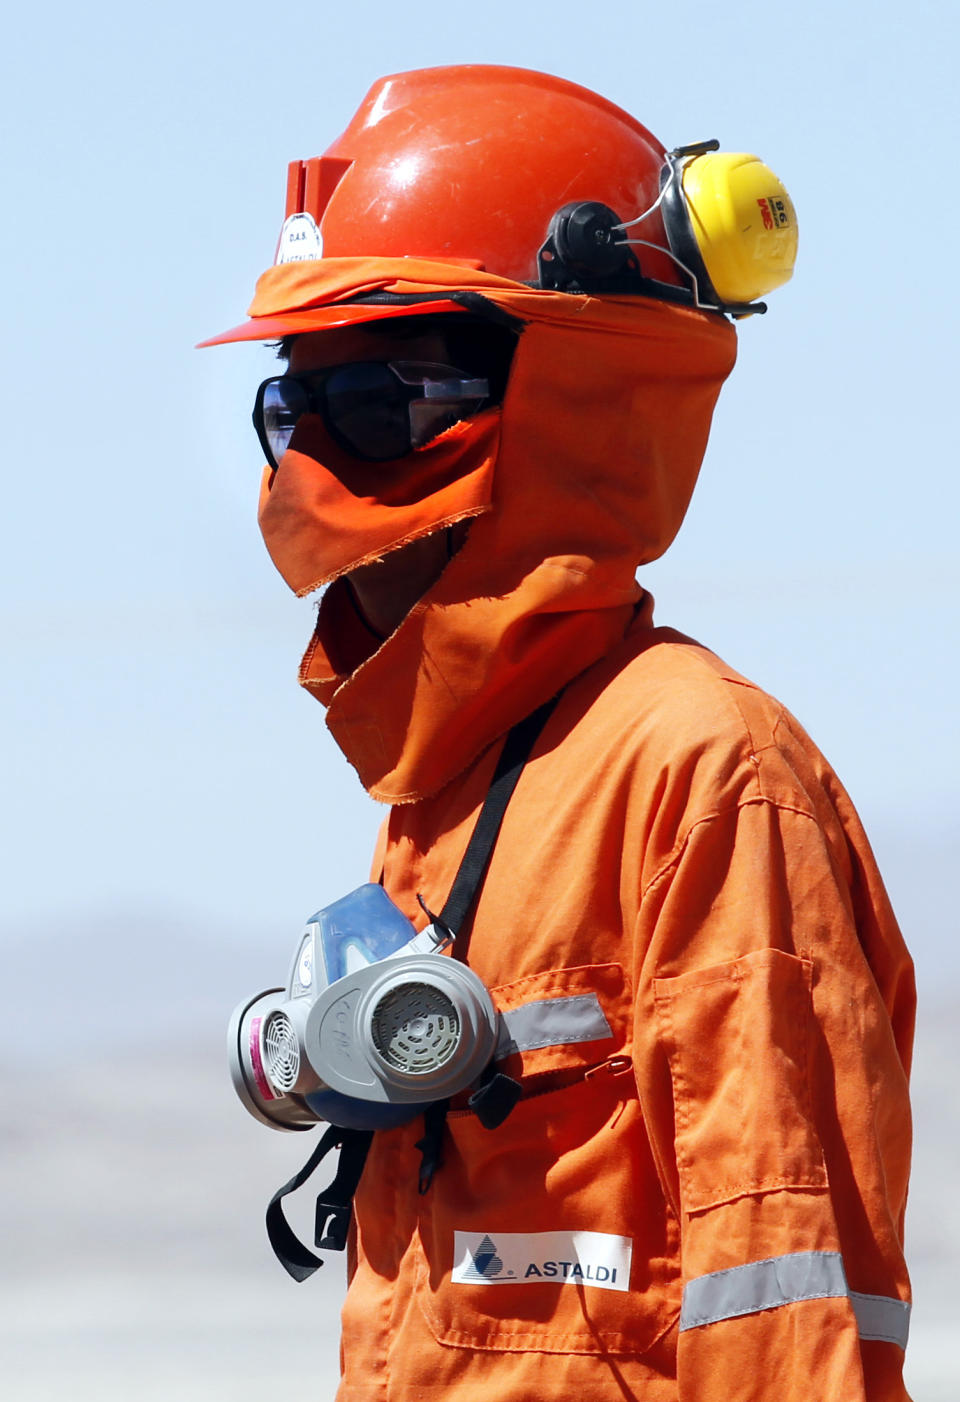 In this Sept. 25, 2012 photo, Jairo Bautista, who works for Astaldi, an Italian company which works with the Chilean National Cooper Corporation, or Codelco, looks toward the entrance of a drilled tunnel at the Chuquicamata copper mine in the Atacama desert in northern Chile. Experts say that by 2019 the Chuquicamata copper mine will be unprofitable, so state-owned mining company Codelco is trying to head off closure by converting the open pit into the world's largest underground mine. Codelco believes the mine still has much more to give, with reserves equal to about 60 percent of all the copper exploited in the mine's history still buried deep beneath the crater. (AP Photo/Jorge Saenz)